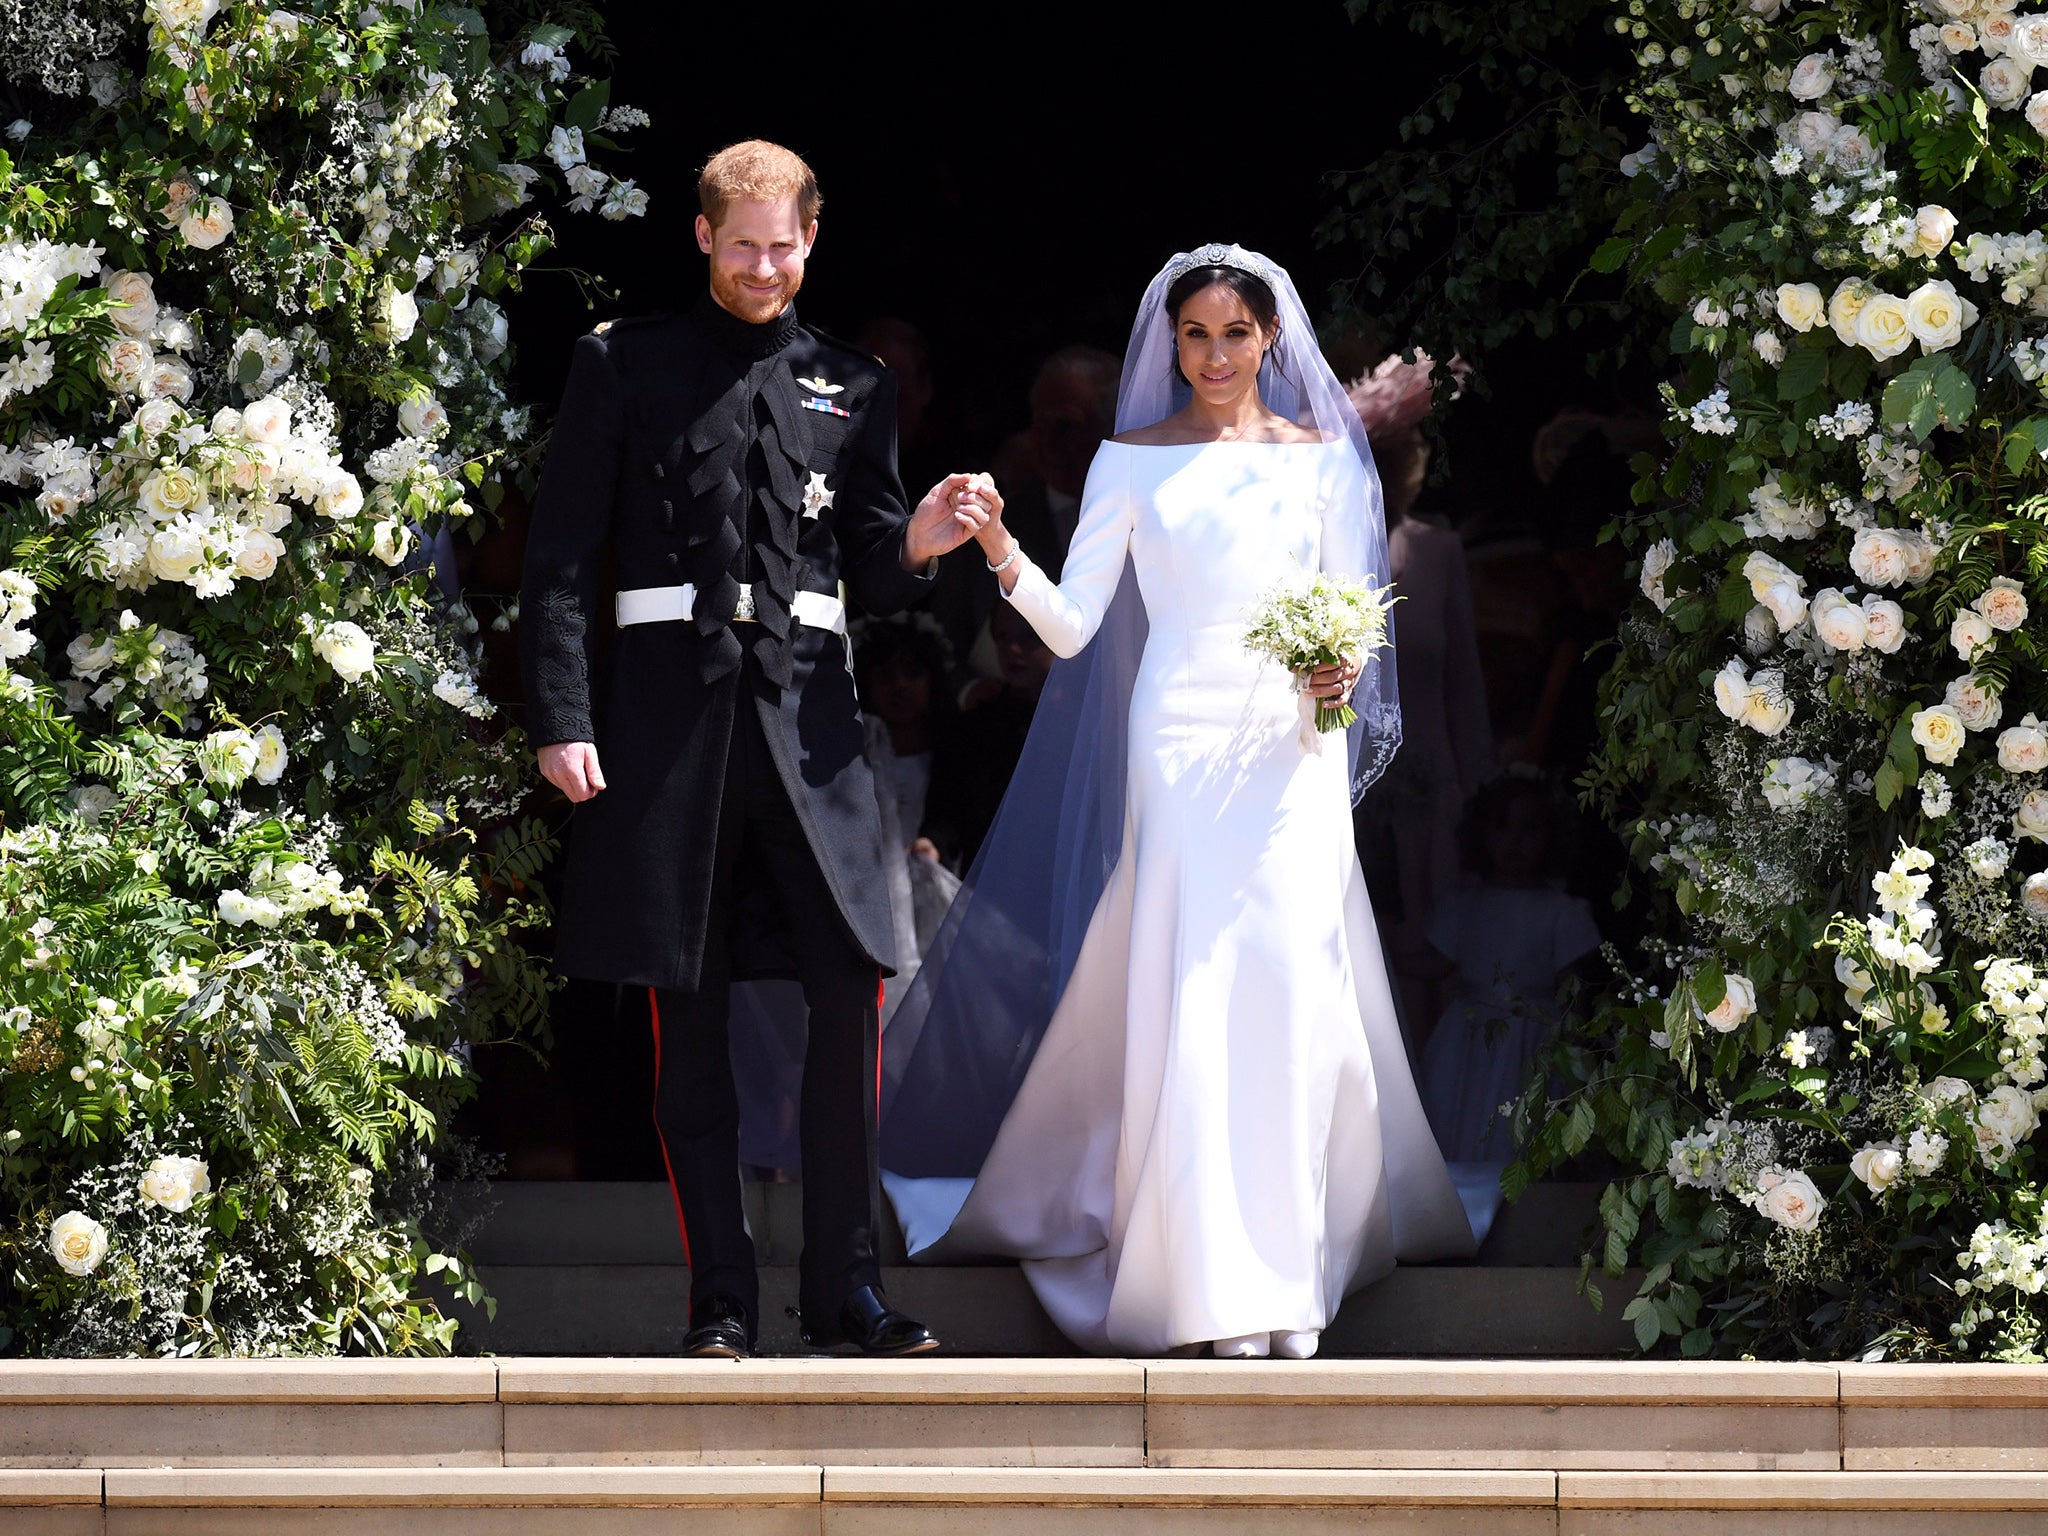 Billions across the globe tuned in for another Royal wedding